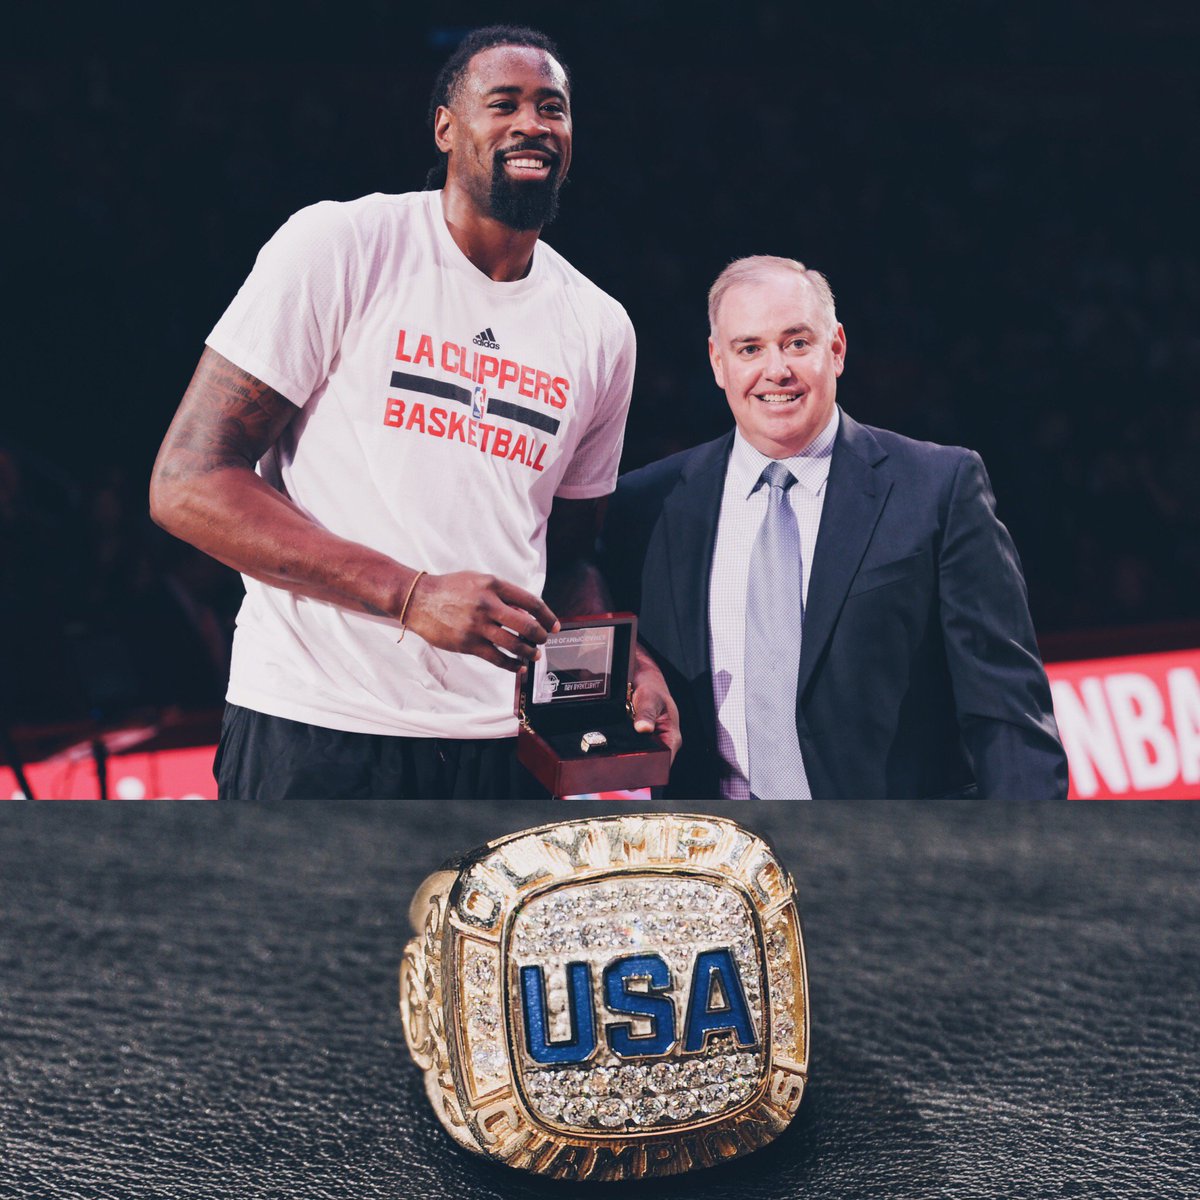 DeAndre Jordan was presented his #USABMNT Championship ring before last night's game. 💍🏀🏅 https://t.co/7JlU6yx3yh